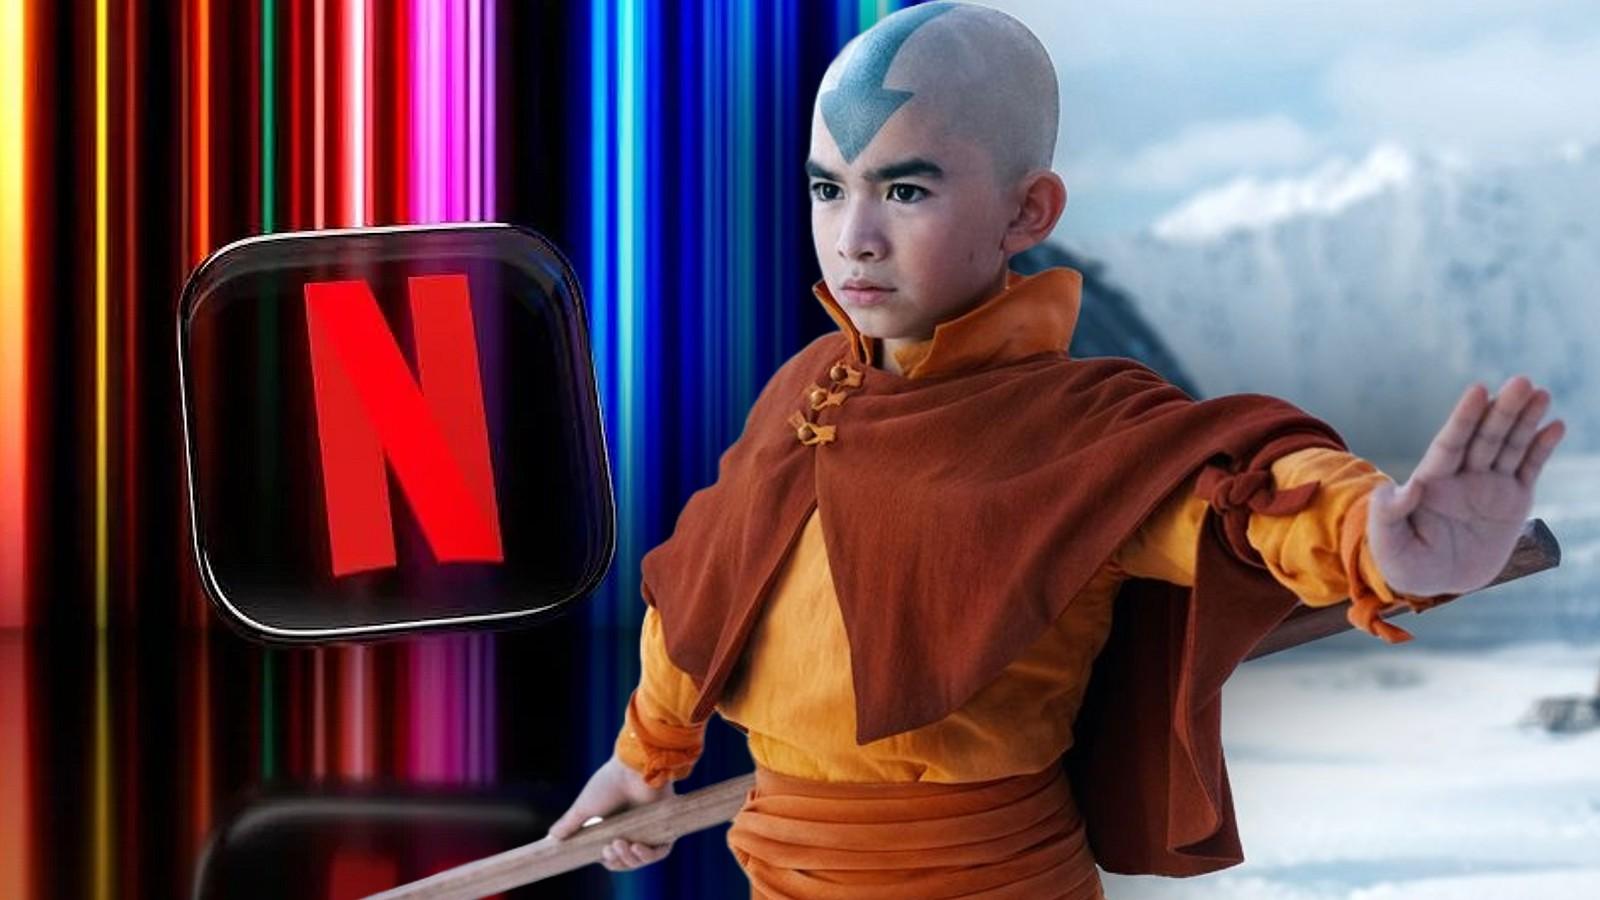 The Netflix logo and a still from Netflix's Avatar The Last Airbender